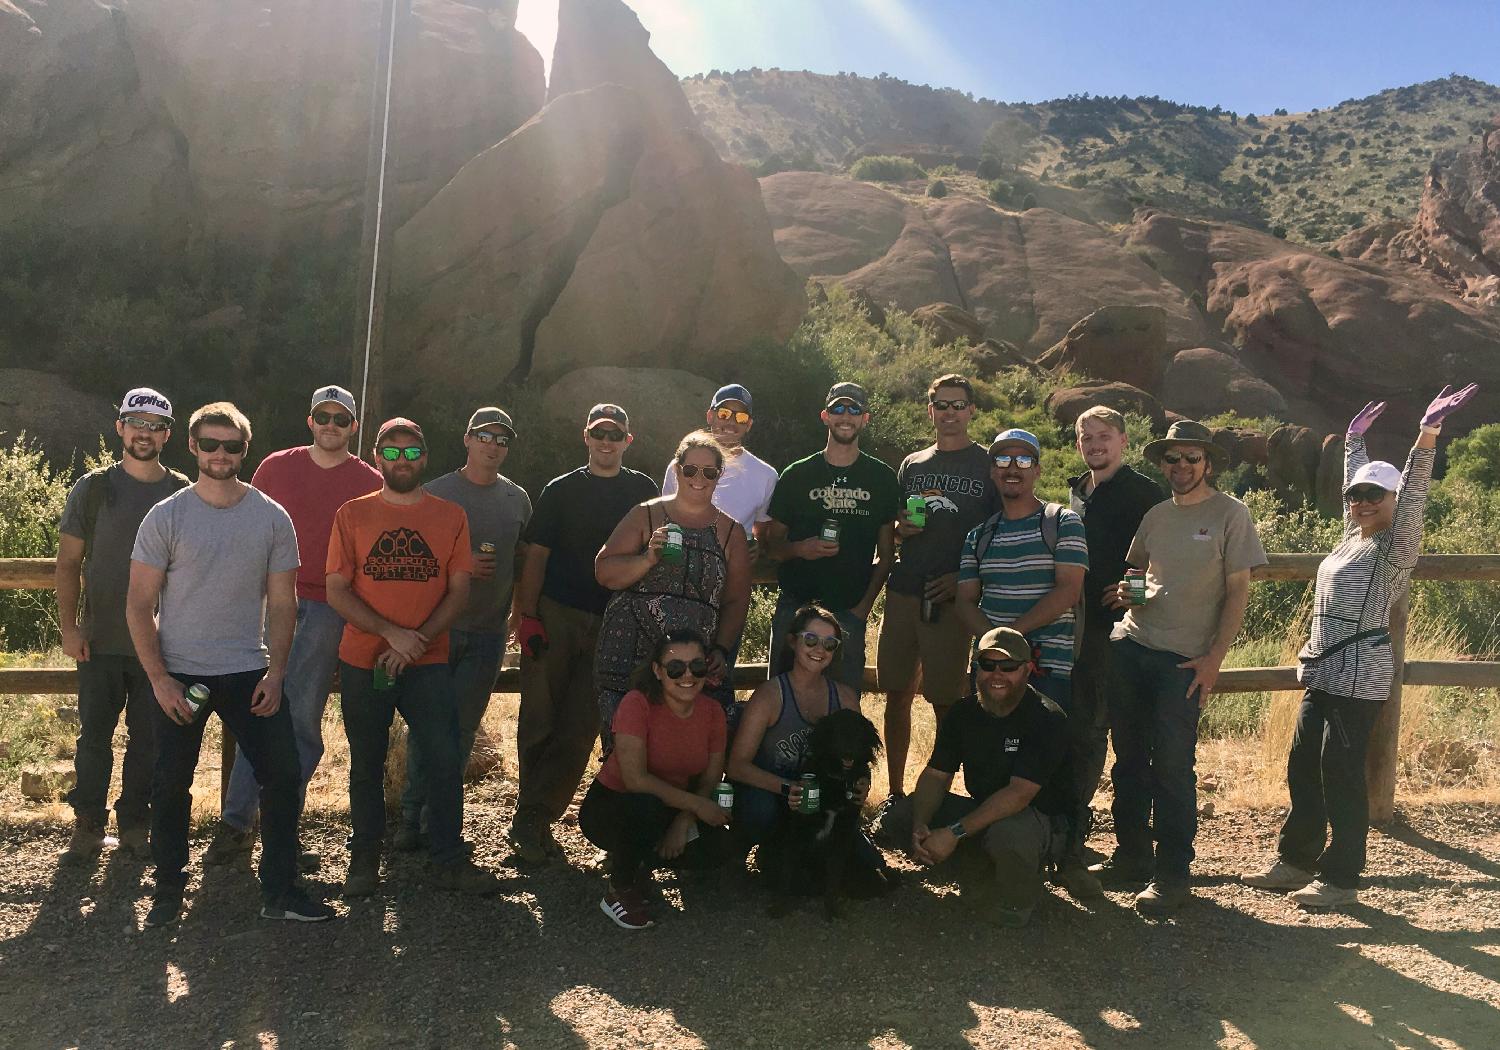 HR Green Denver team members volunteering at Red Rocks Park and Ampitheatre, helping with trail restoration.